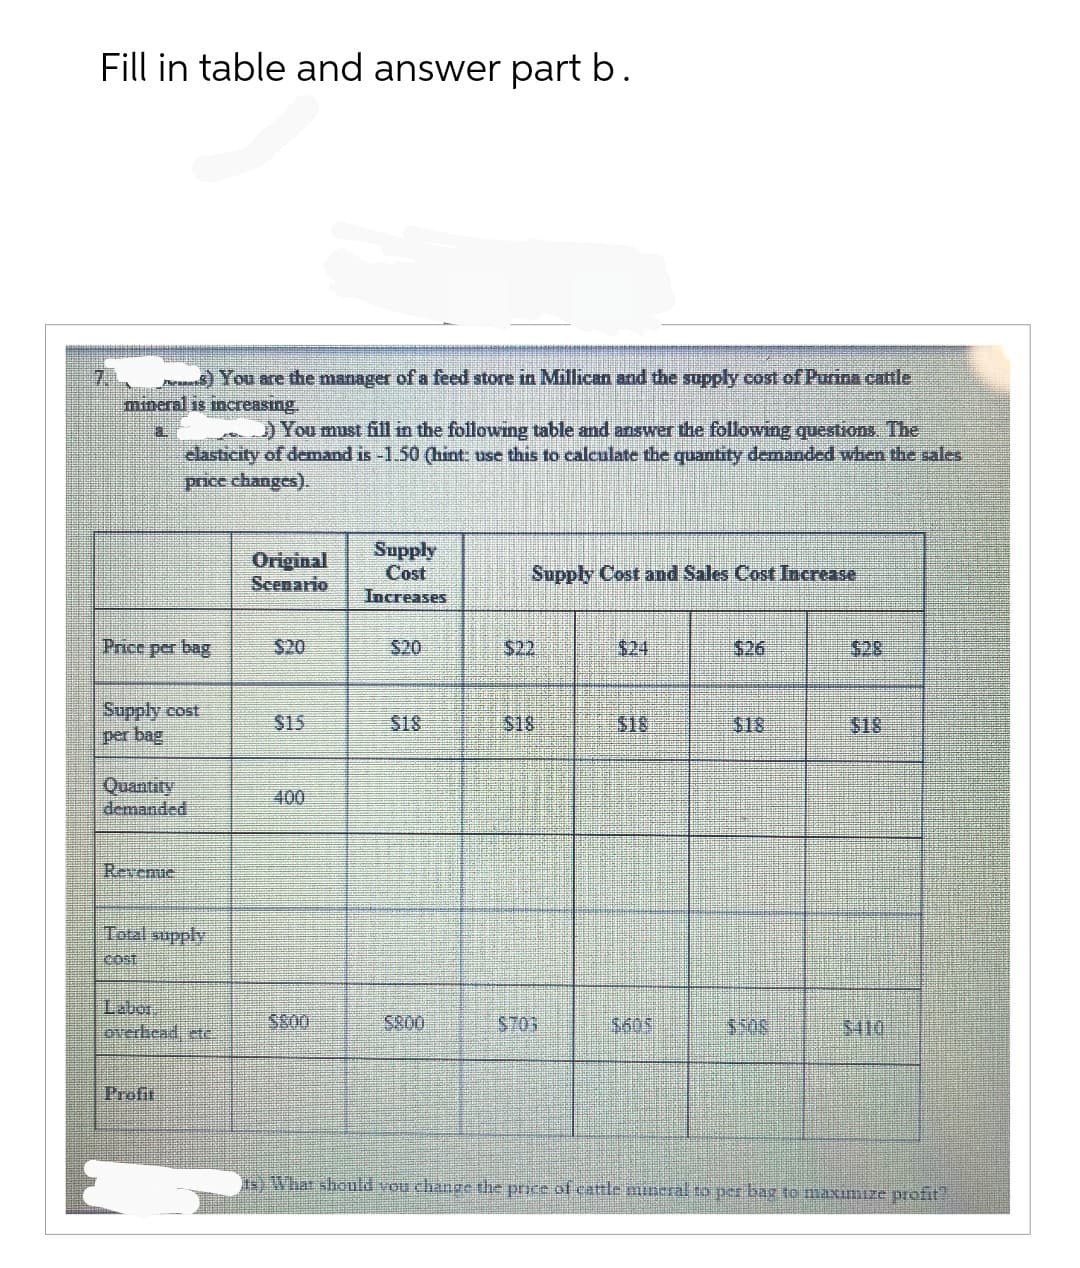 Fill in table and answer part b.
e) You are the manager of a feed store in Millican and the supply cost of Purina cattle
mineral is increasing
Price per bag
) You must fill in the following table and answer the following questions. The
elasticity of demand is -1.50 (hint: use this to calculate the quantity demanded when the sales
price changes).
Supply cost
per bag
Quantity
demanded
Revenue
Total supply
COST
overhead, etc.
Profit
Original
Scenario
$20
$15
400
5800
Supply
Cost
Increases
$20
$18
5800
Supply Cost and Sales Cost Increase
$22
$703
$18
$605
$26
$18
$28
5410
ts) What should you change the price of cattle mineral to per bag to maximize profit?